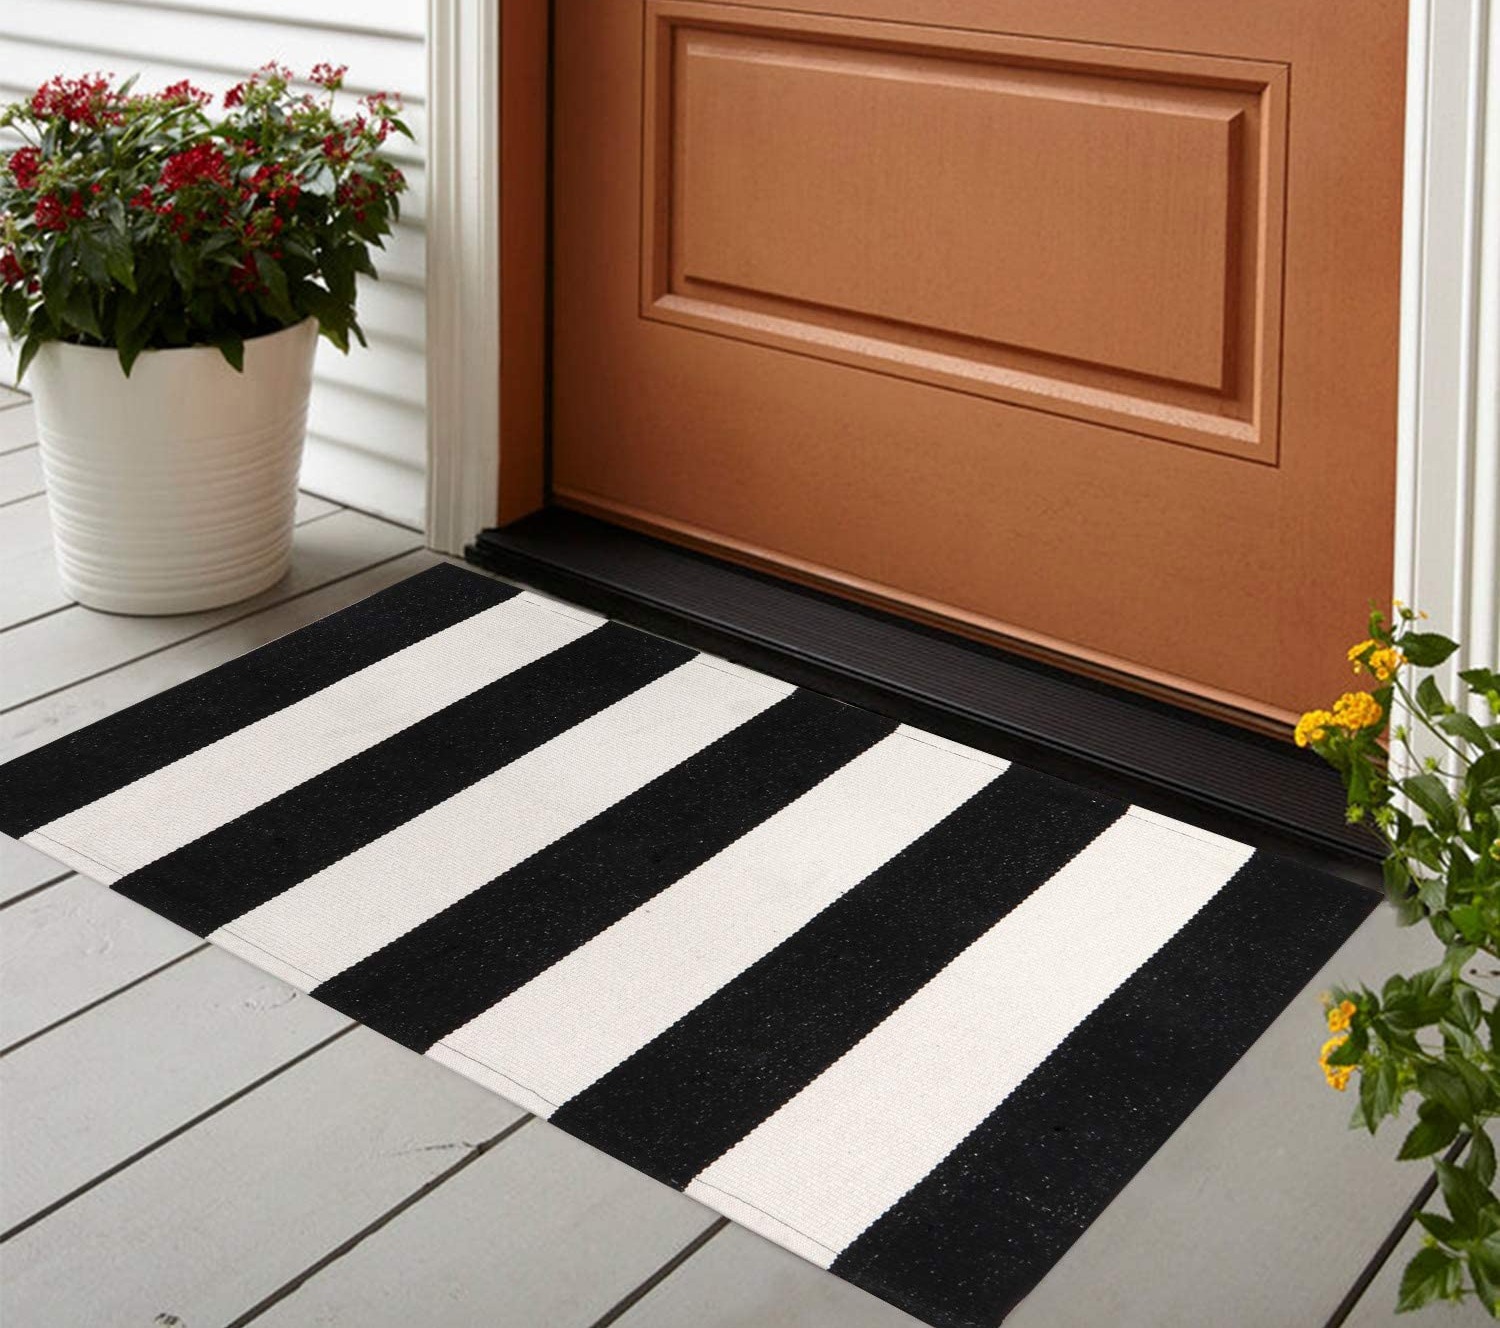  Black and White Striped Rug